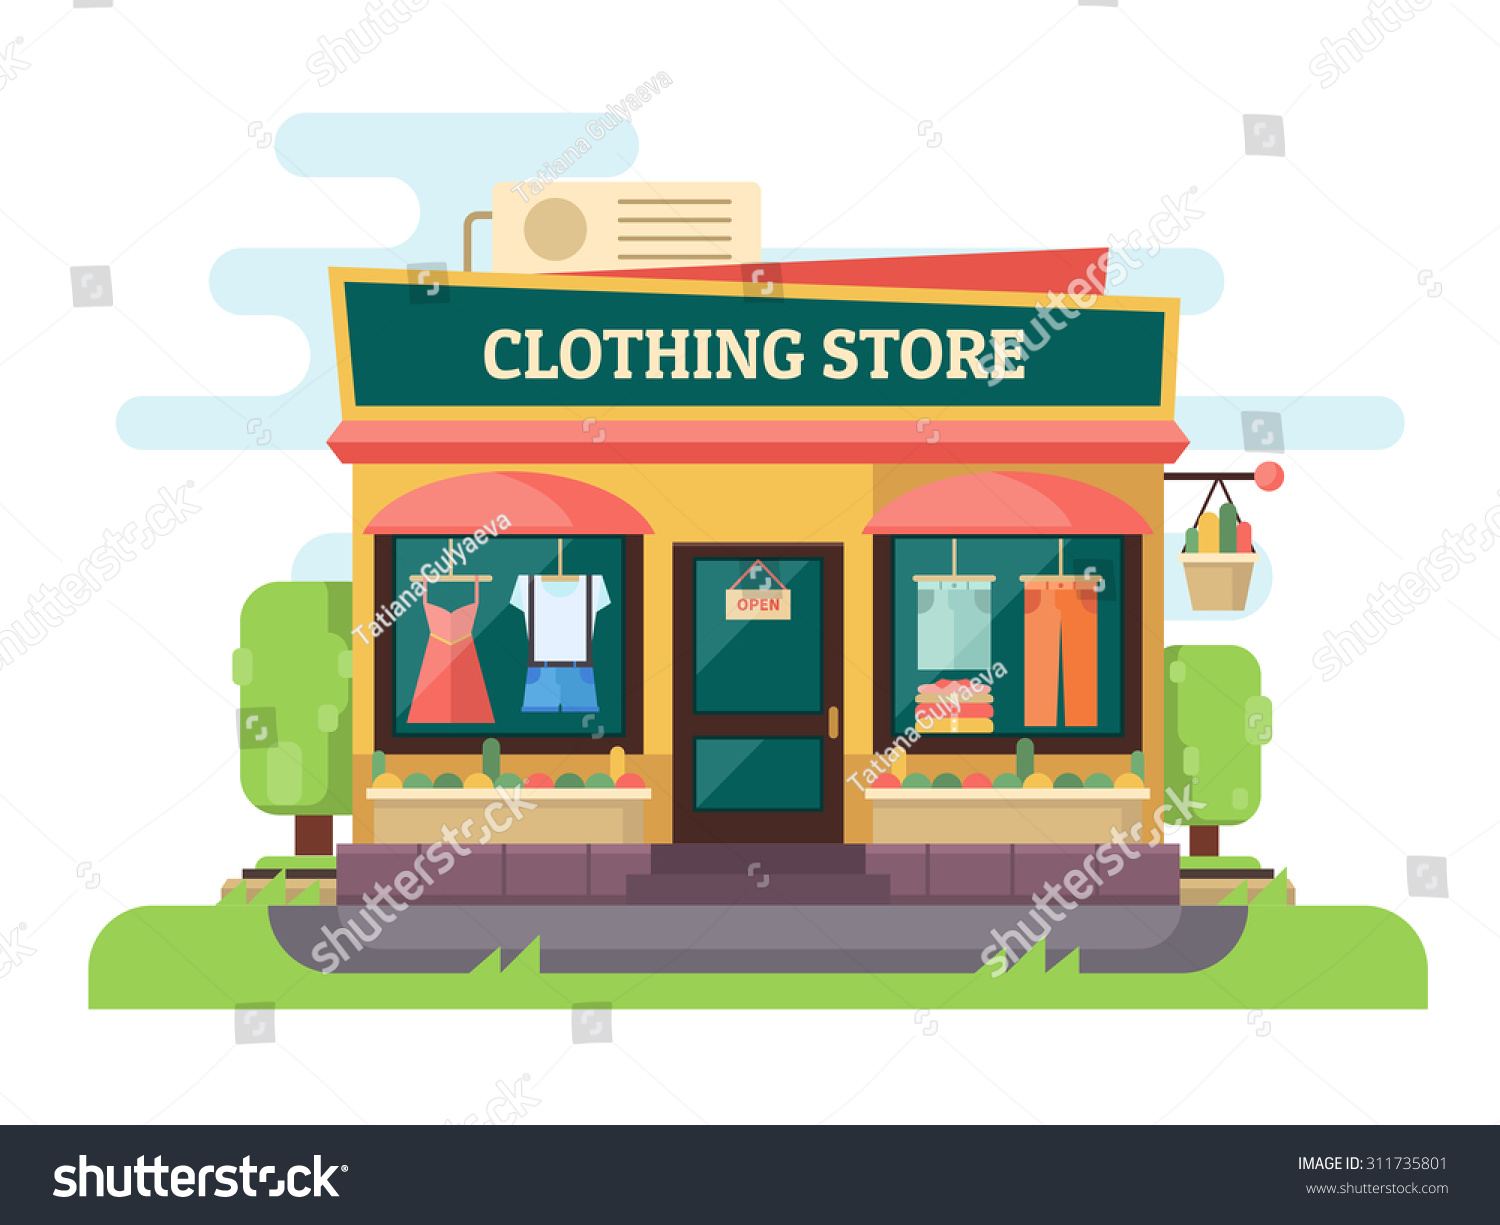 clipart clothing store - photo #12